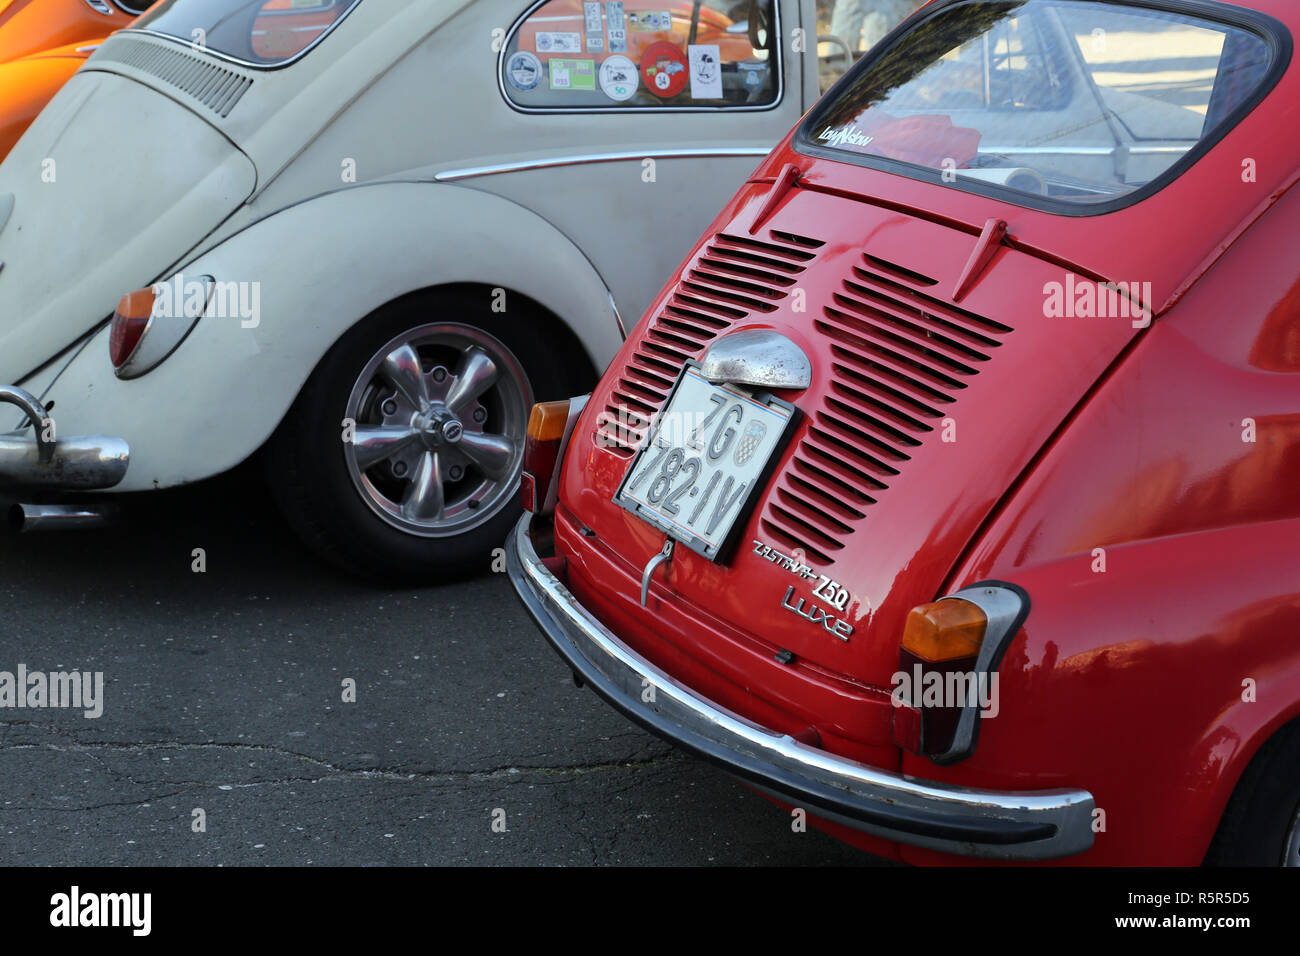 VW Volkswagen Beetle and Zastava 750, vintage cars exhibited during the Retro Mobile Parade in Zagreb, Croatia Stock Photo